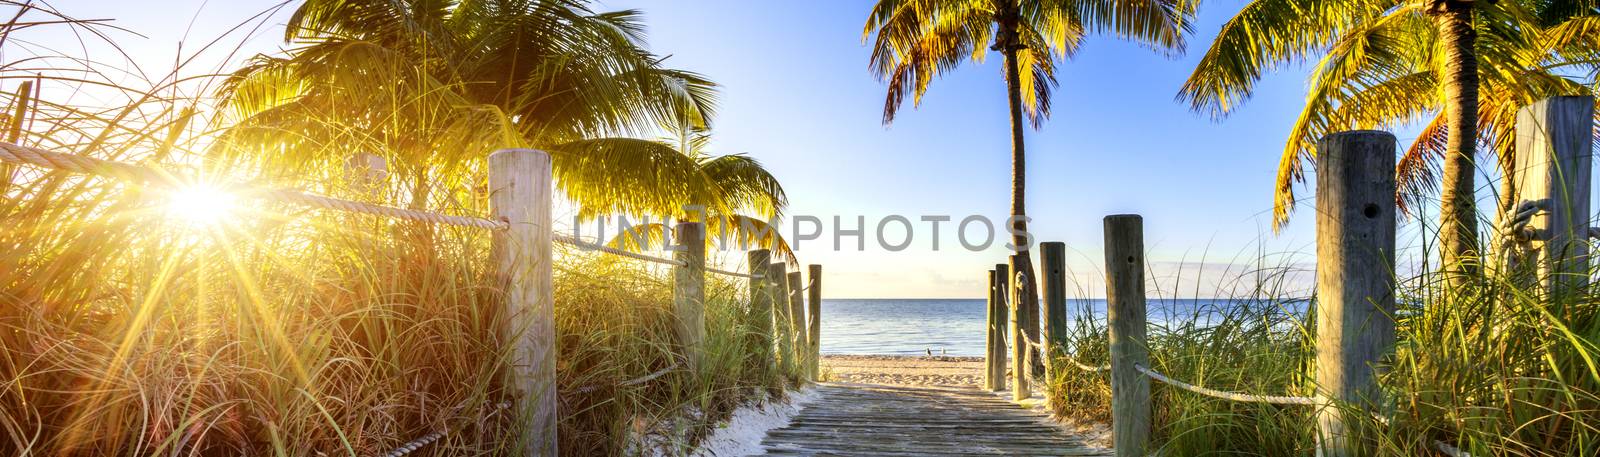 way to the beach in Key West, Miami, Floride, USA